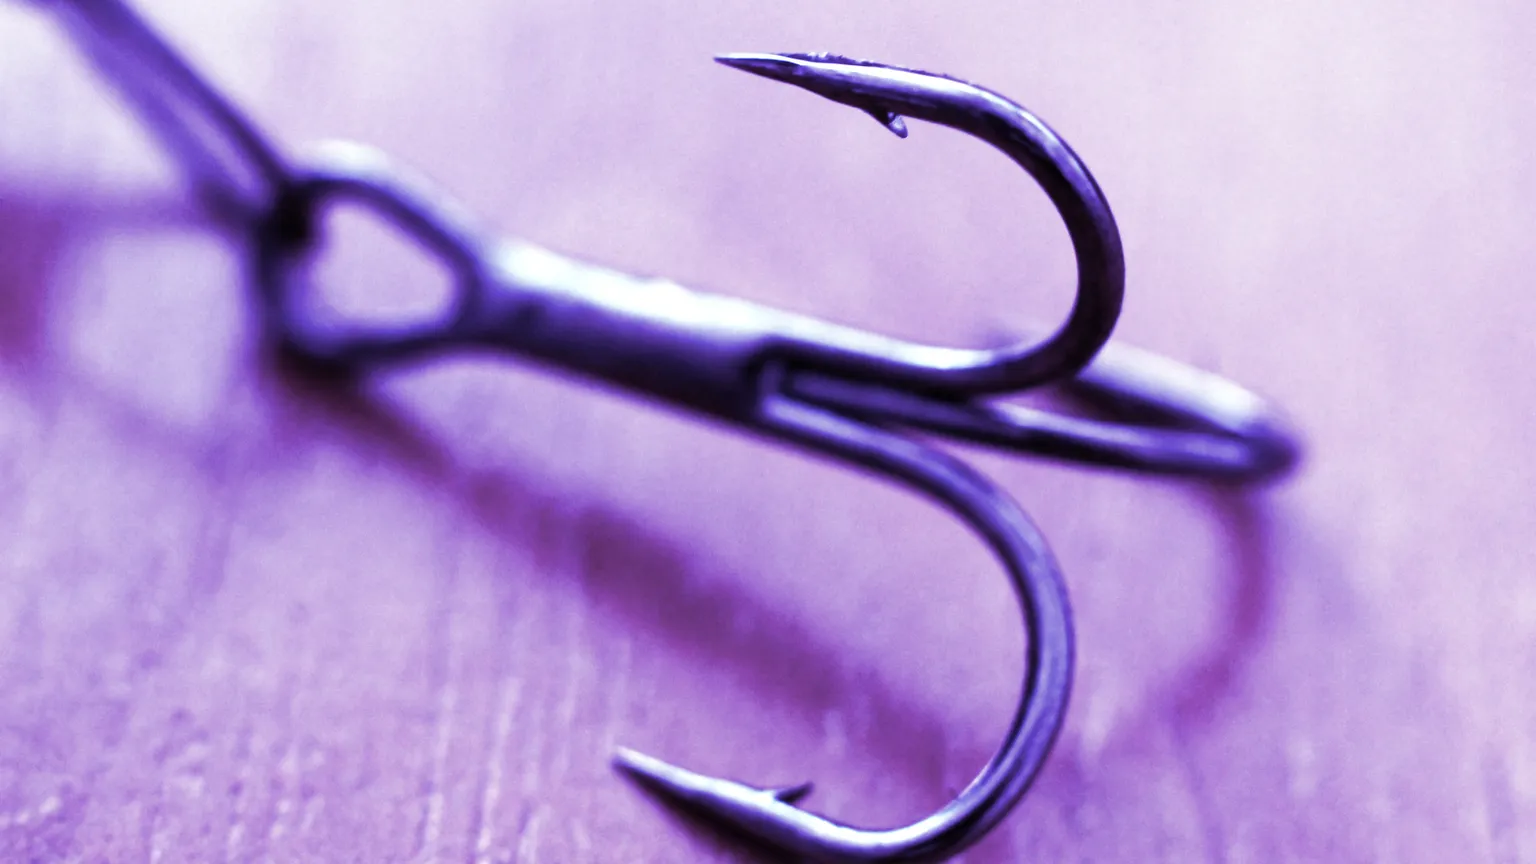 Phishing attacks see victims duped into giving up critical information. Image: Shutterstock